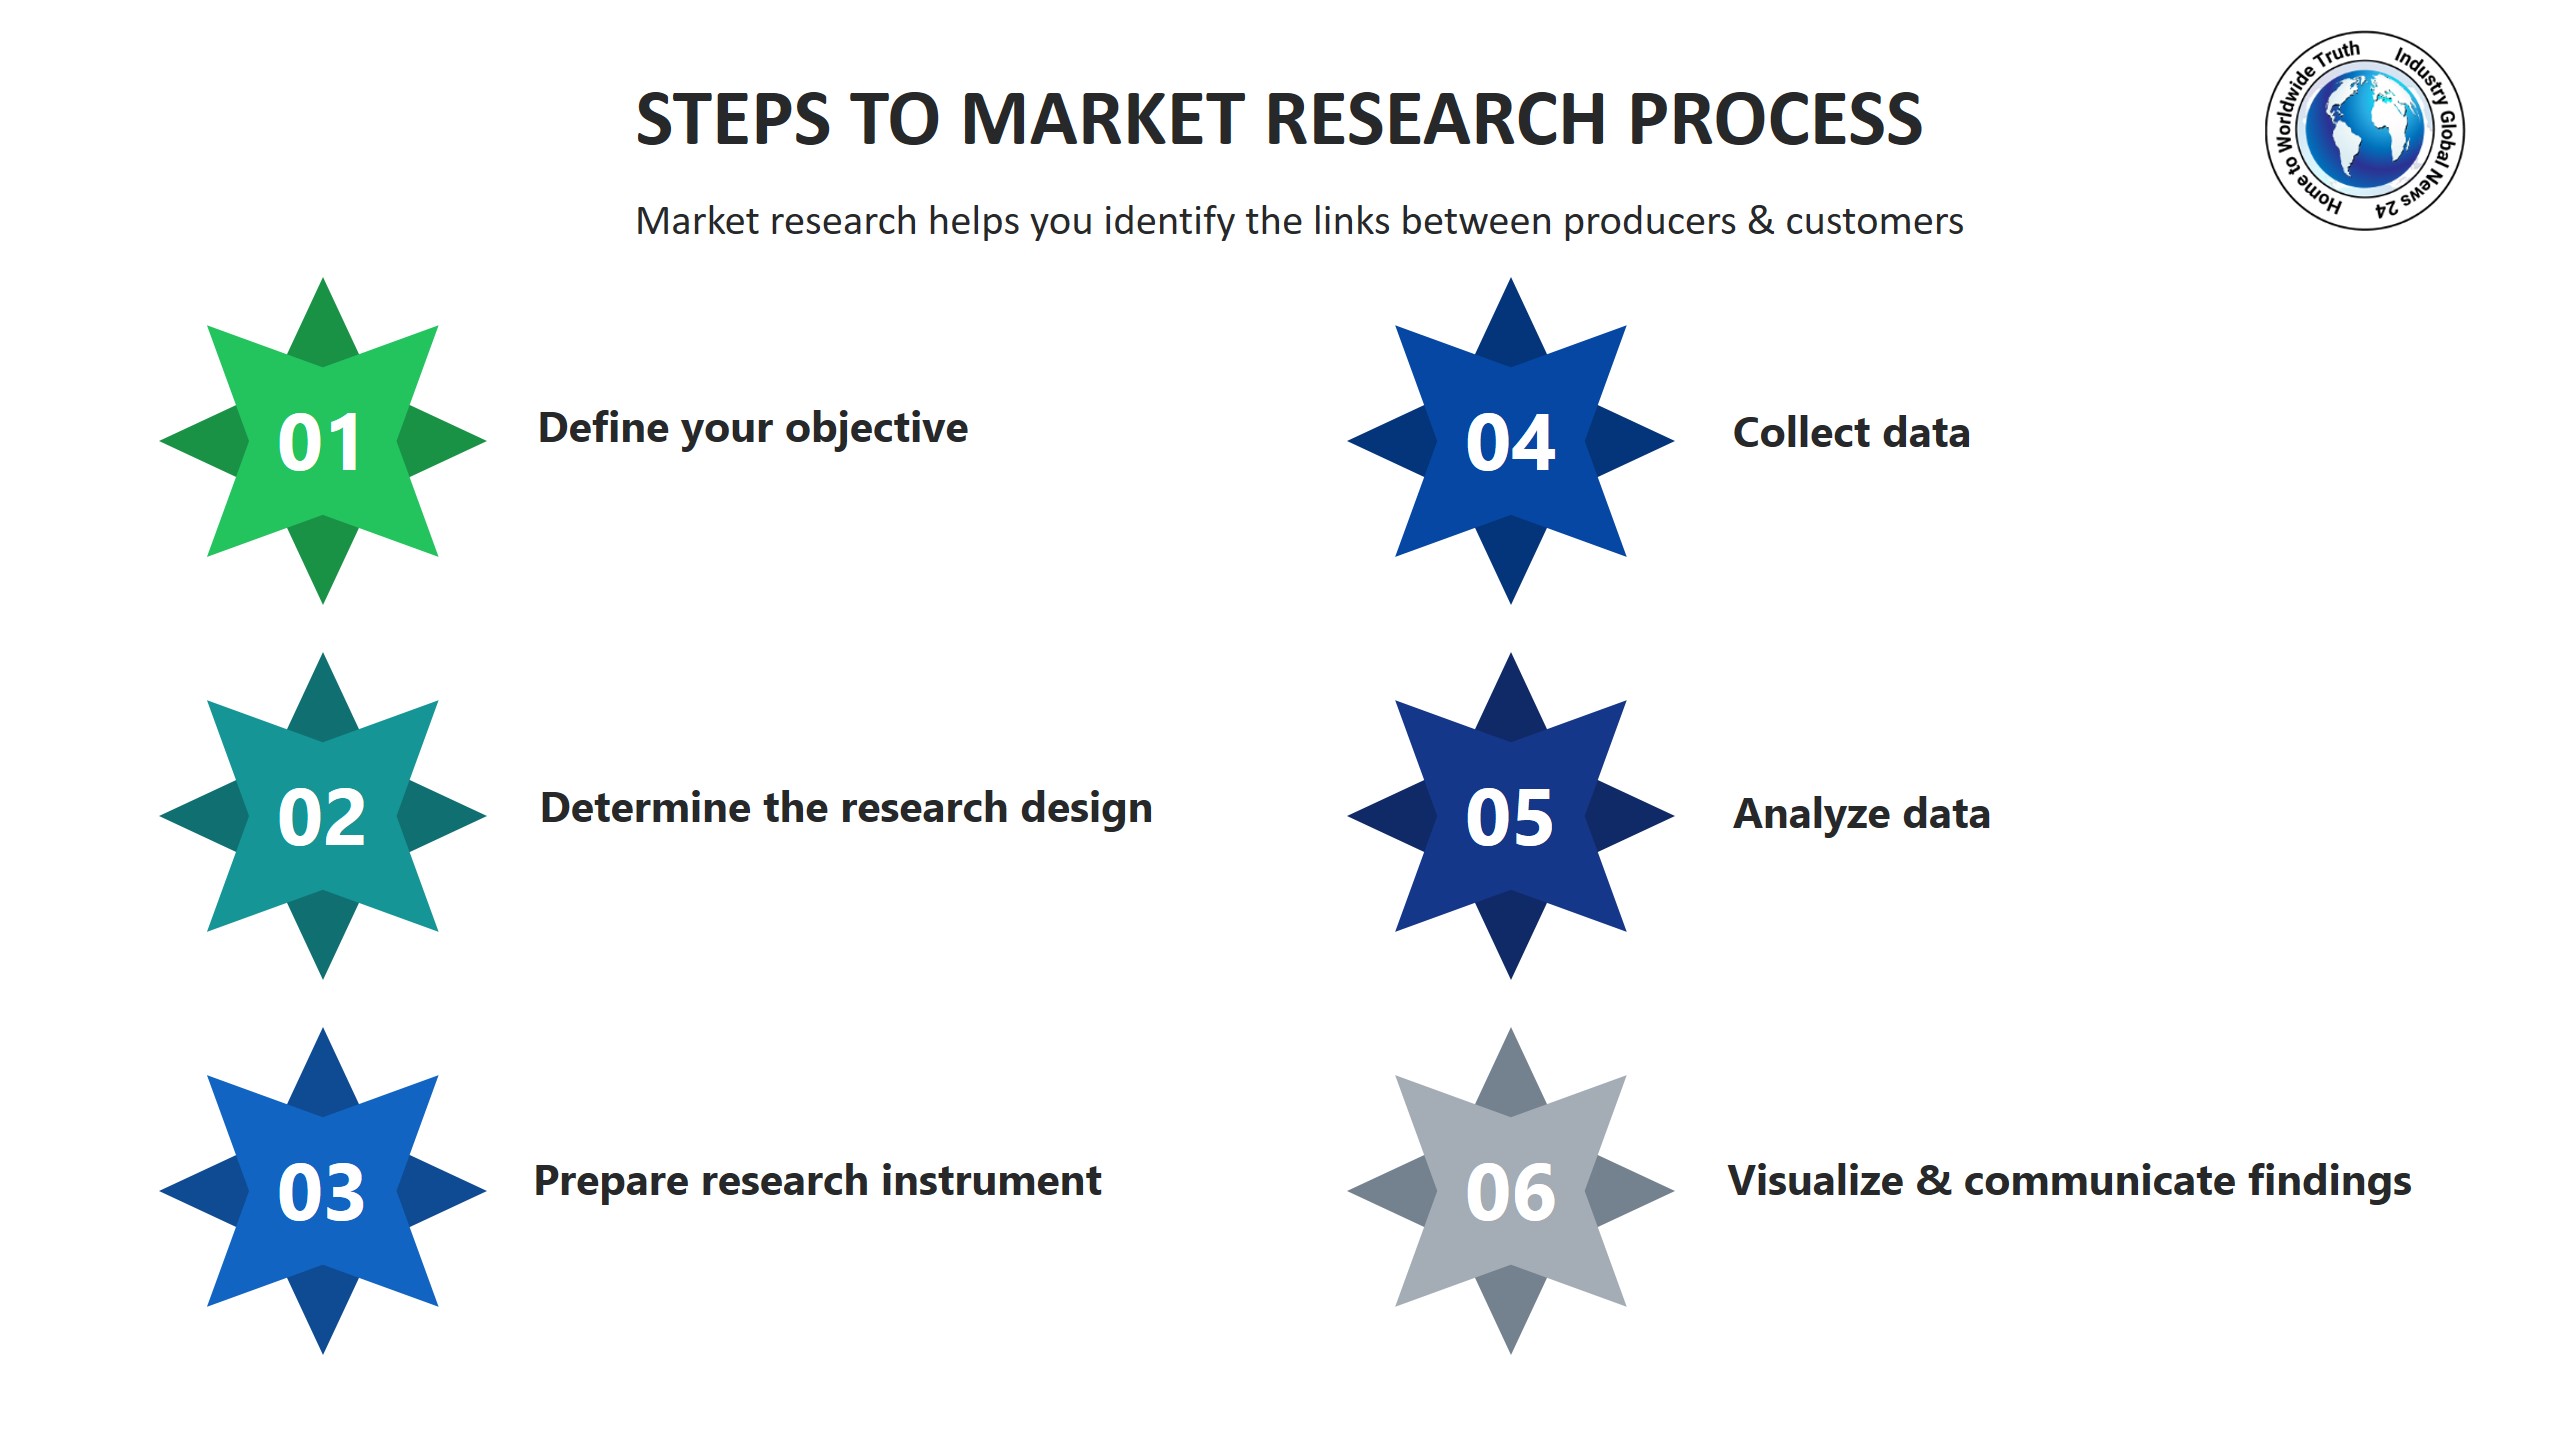 Steps to market research process